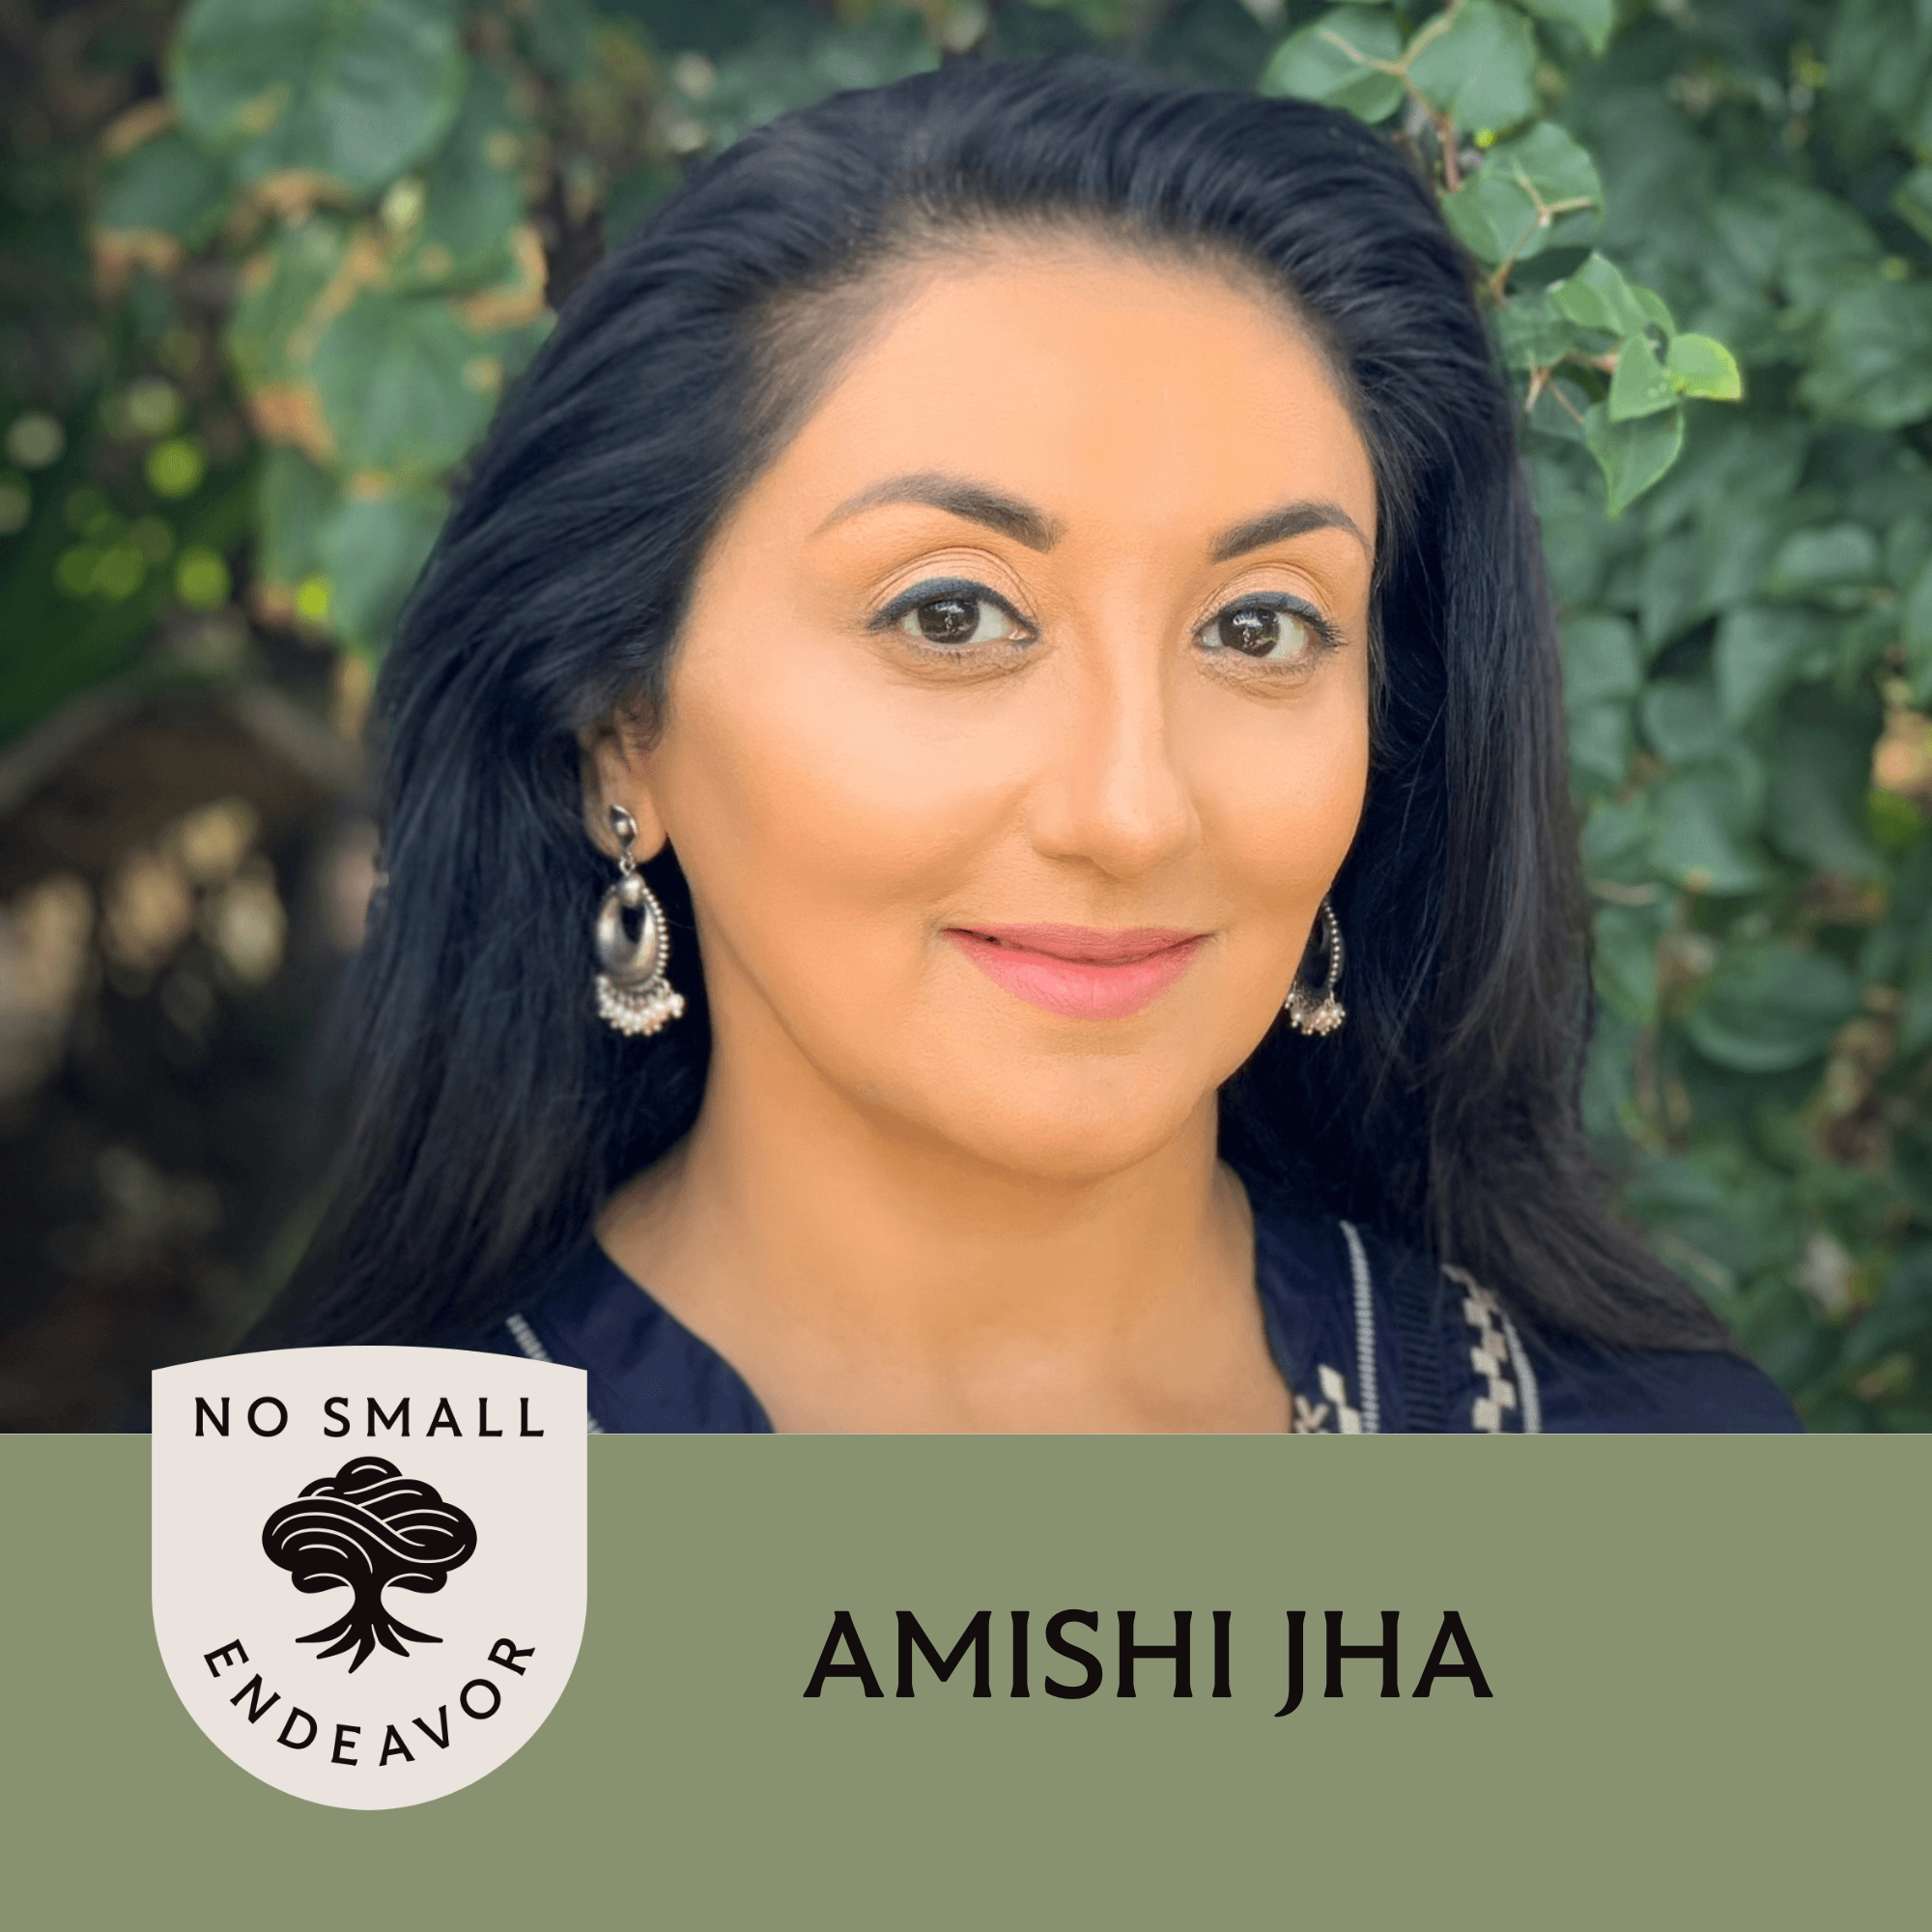 Thumbnail for "167: Amishi Jha: Push-ups for Your Brain".